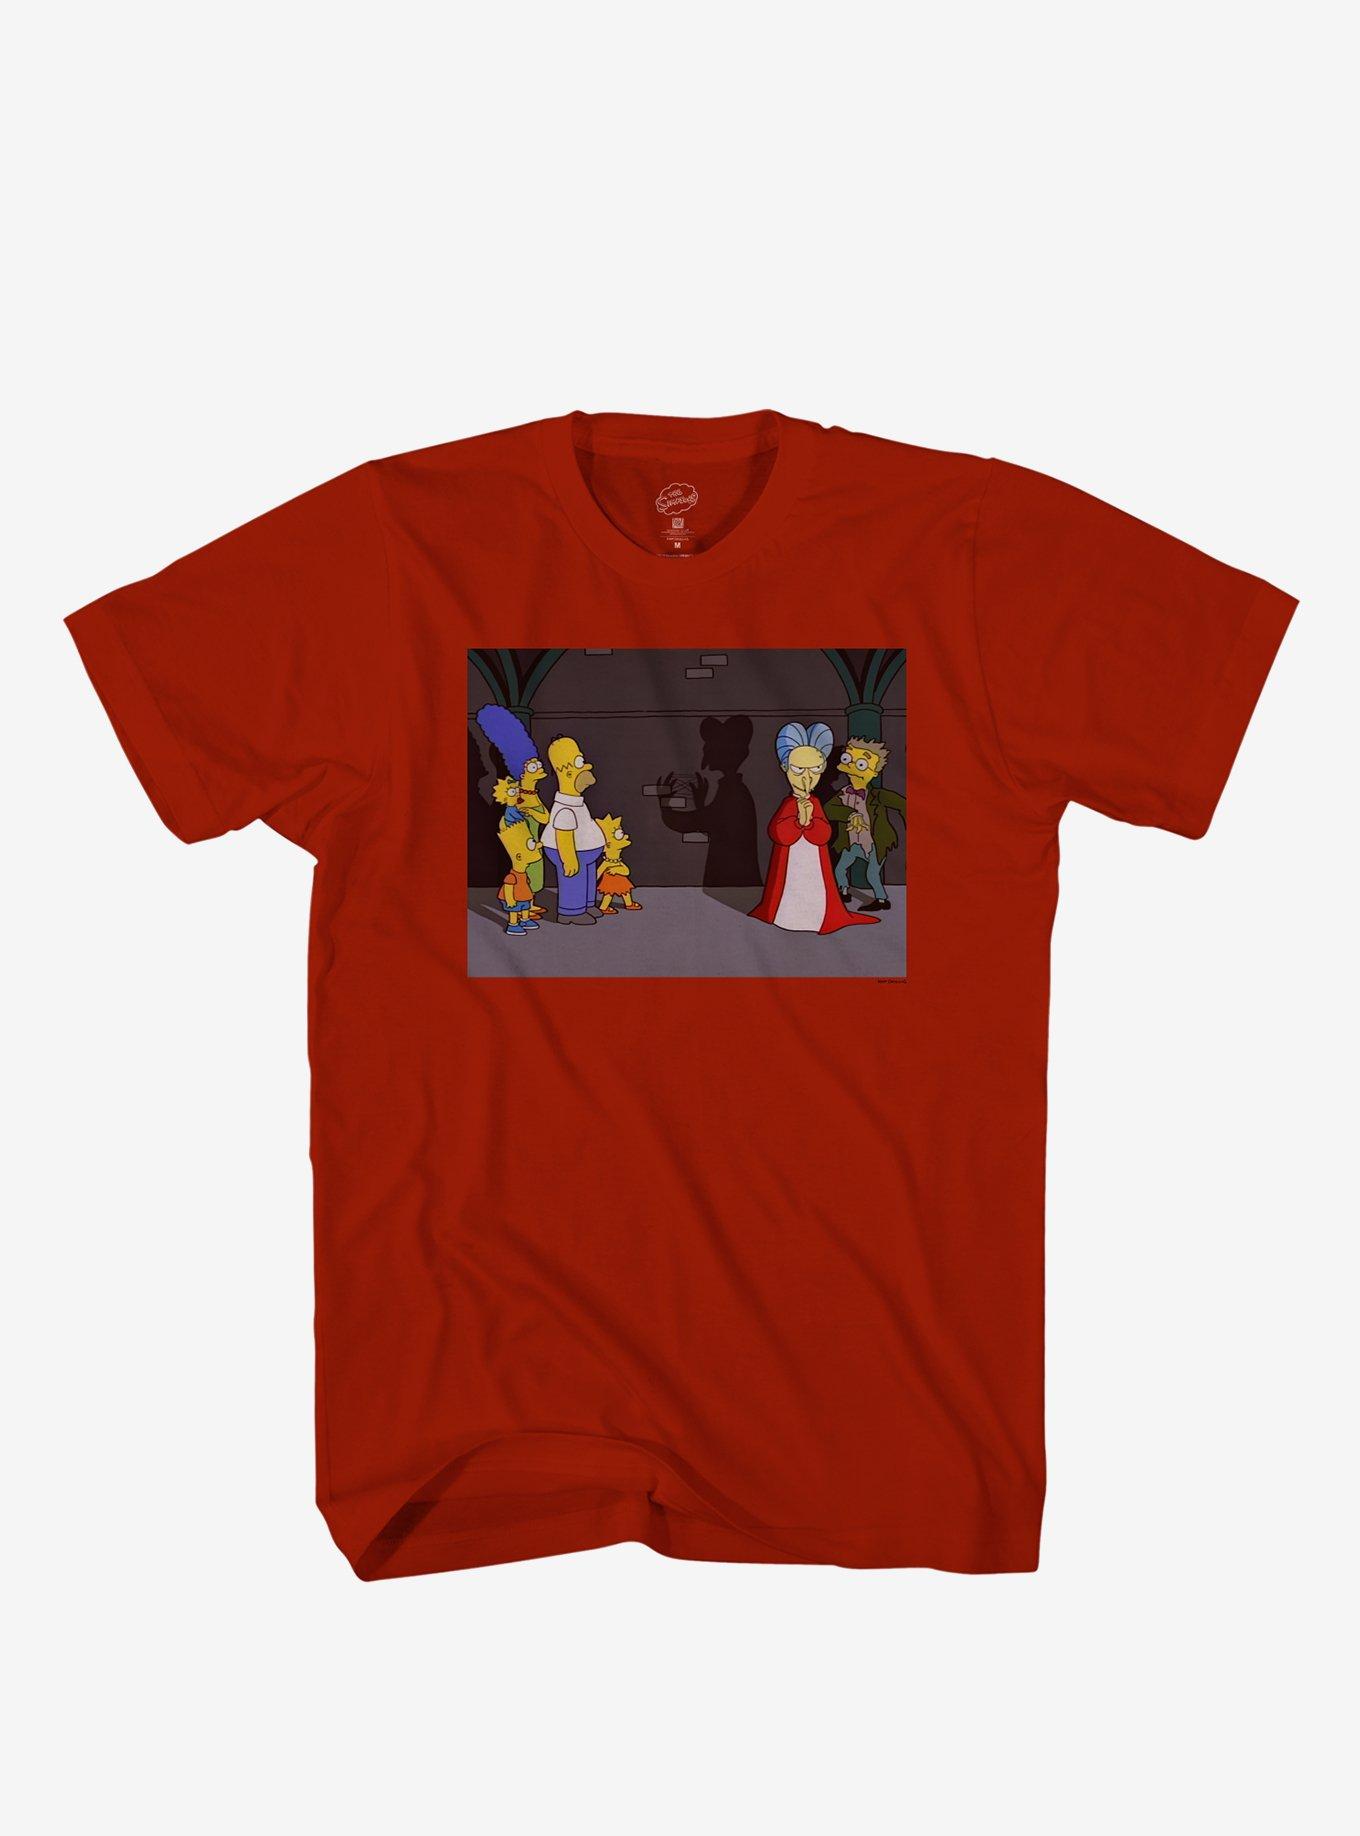 The Simpsons Treehouse Of Horror IV Vampire T-Shirt Hot Topic Exclusive, MAROON, hi-res